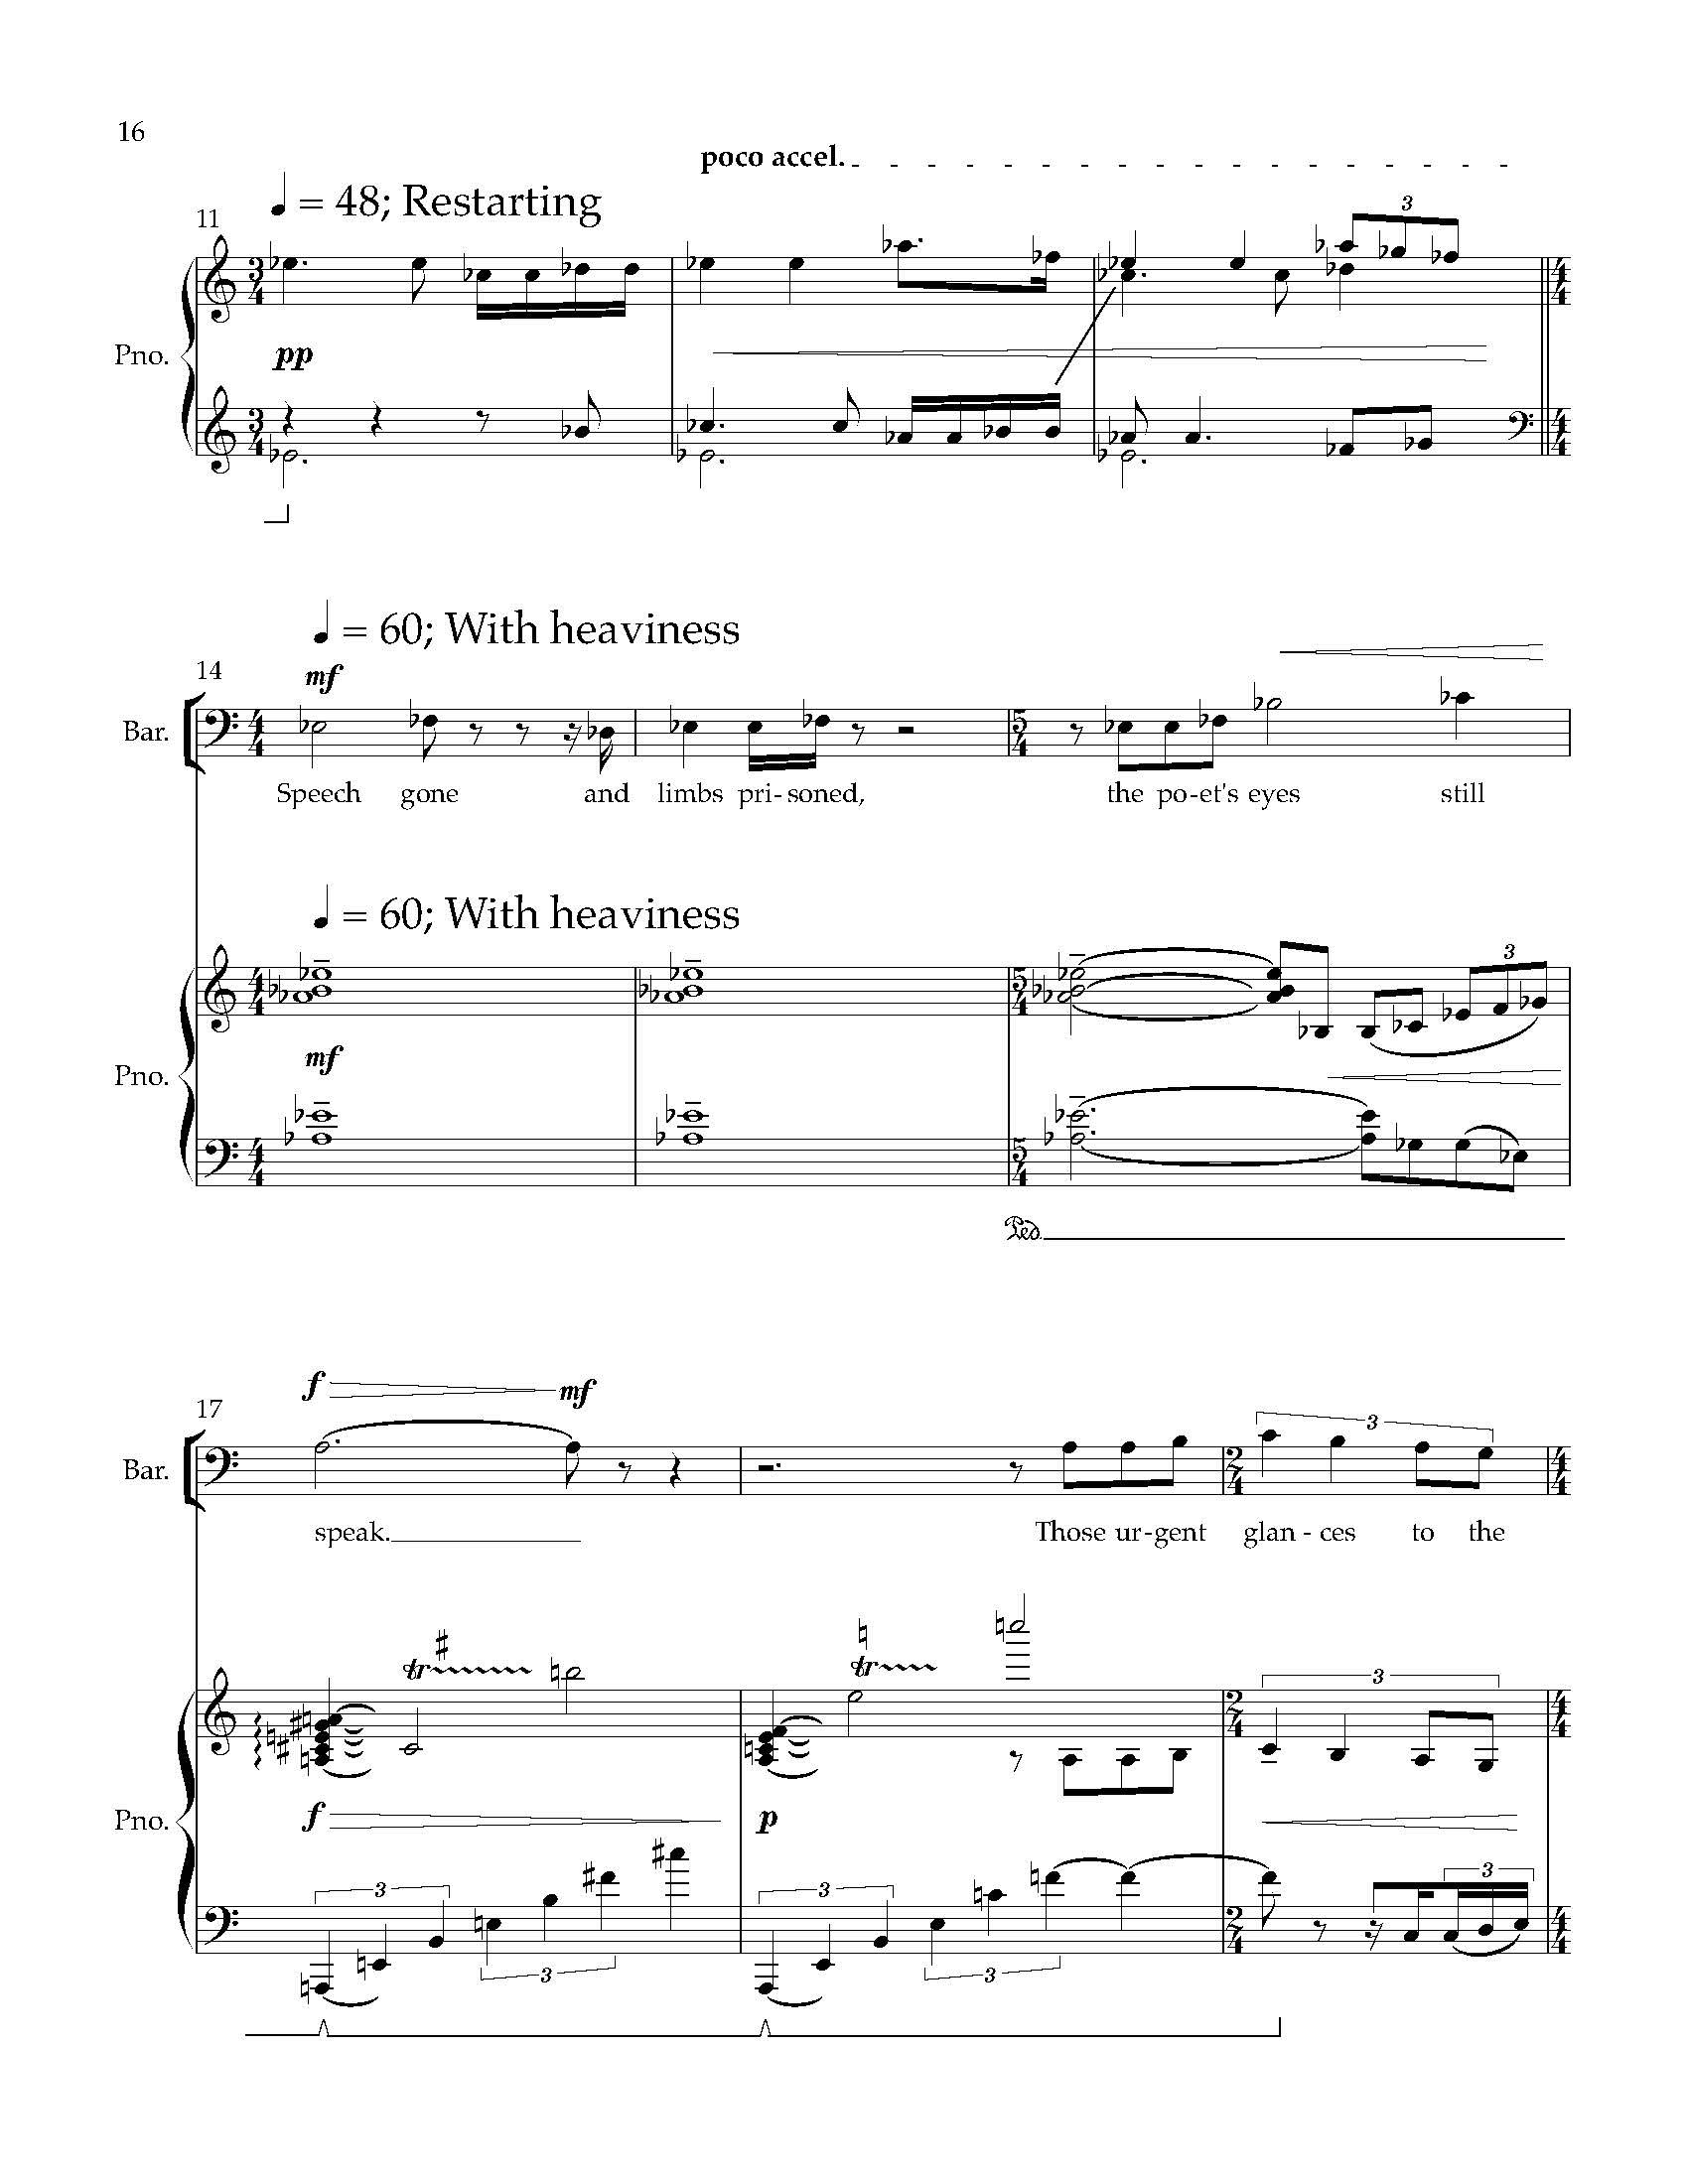 Sky - Complete Score (Revised)_Page_22.jpg